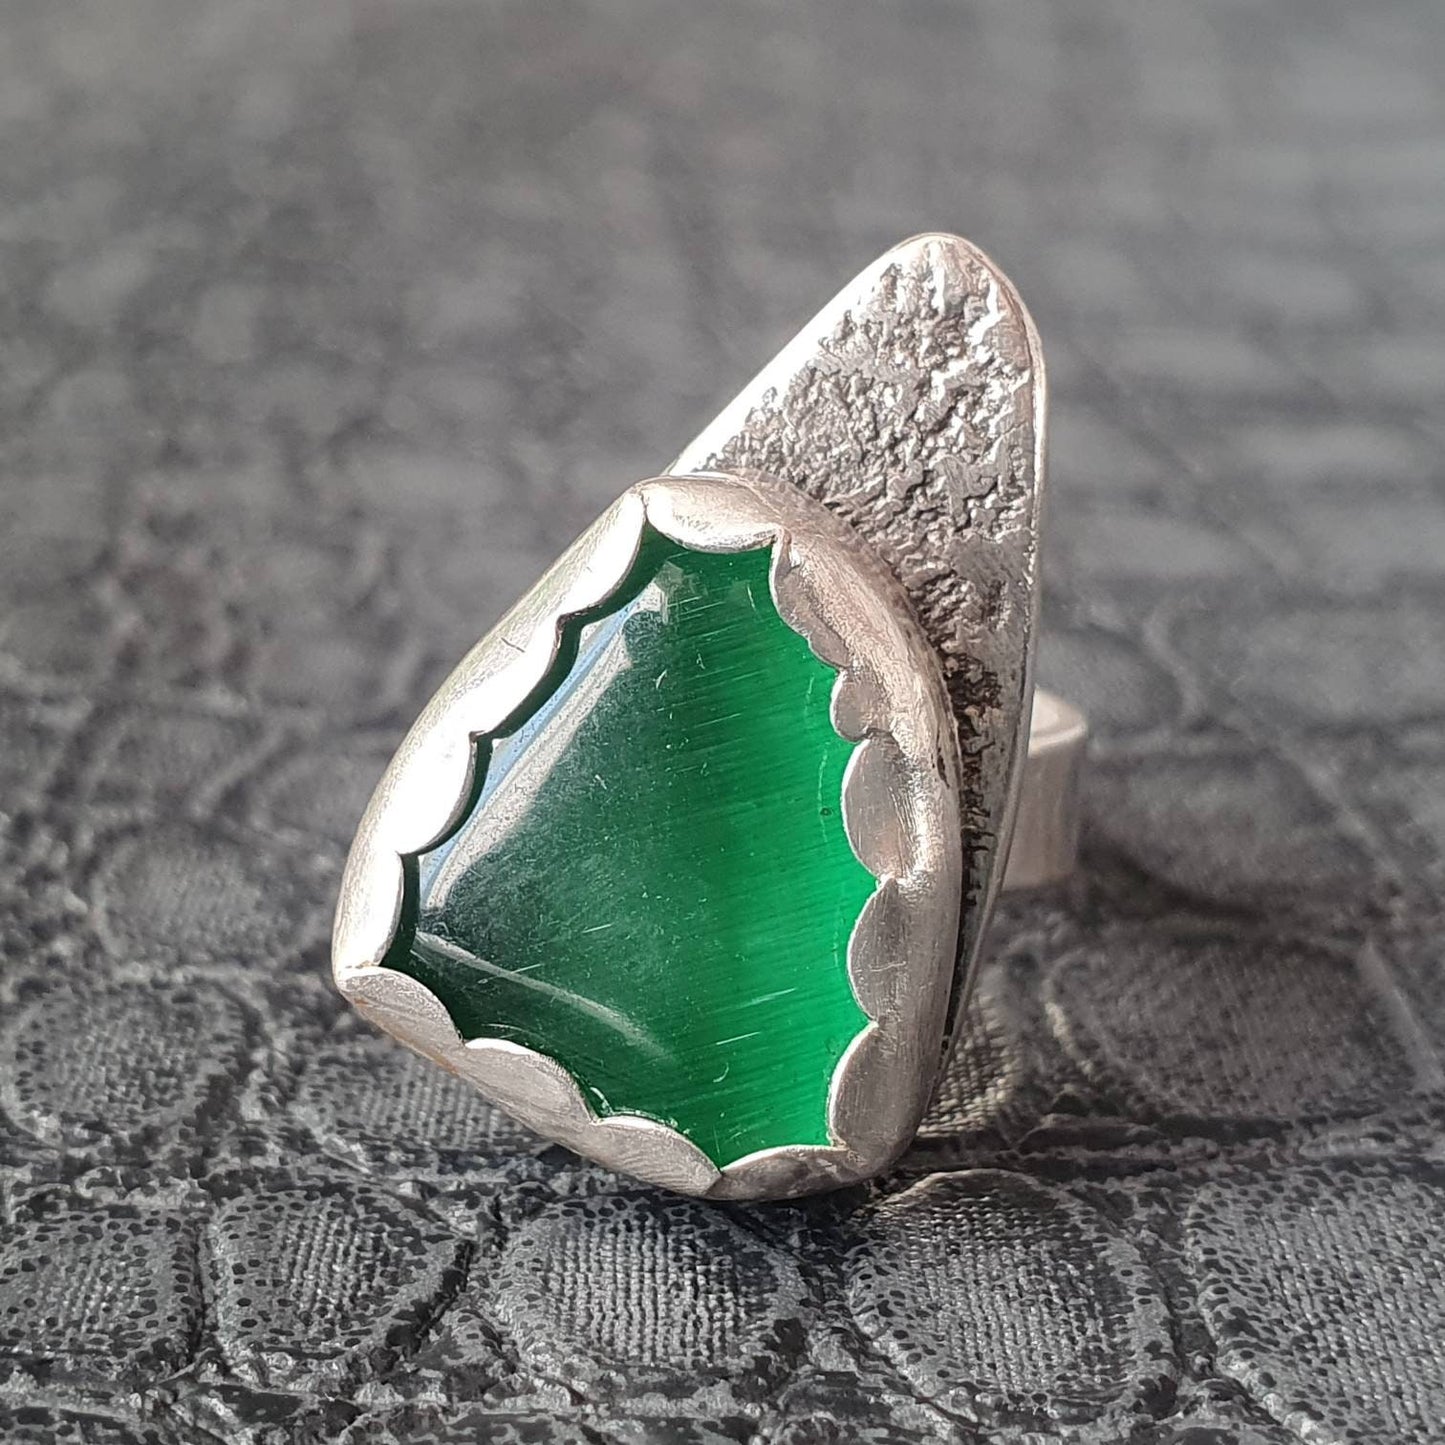 Silver ring, statement ring, sterling silver ring, green sea glass, recycled silver, upcycled jewelry, ethical, gifts, unique jewelry,